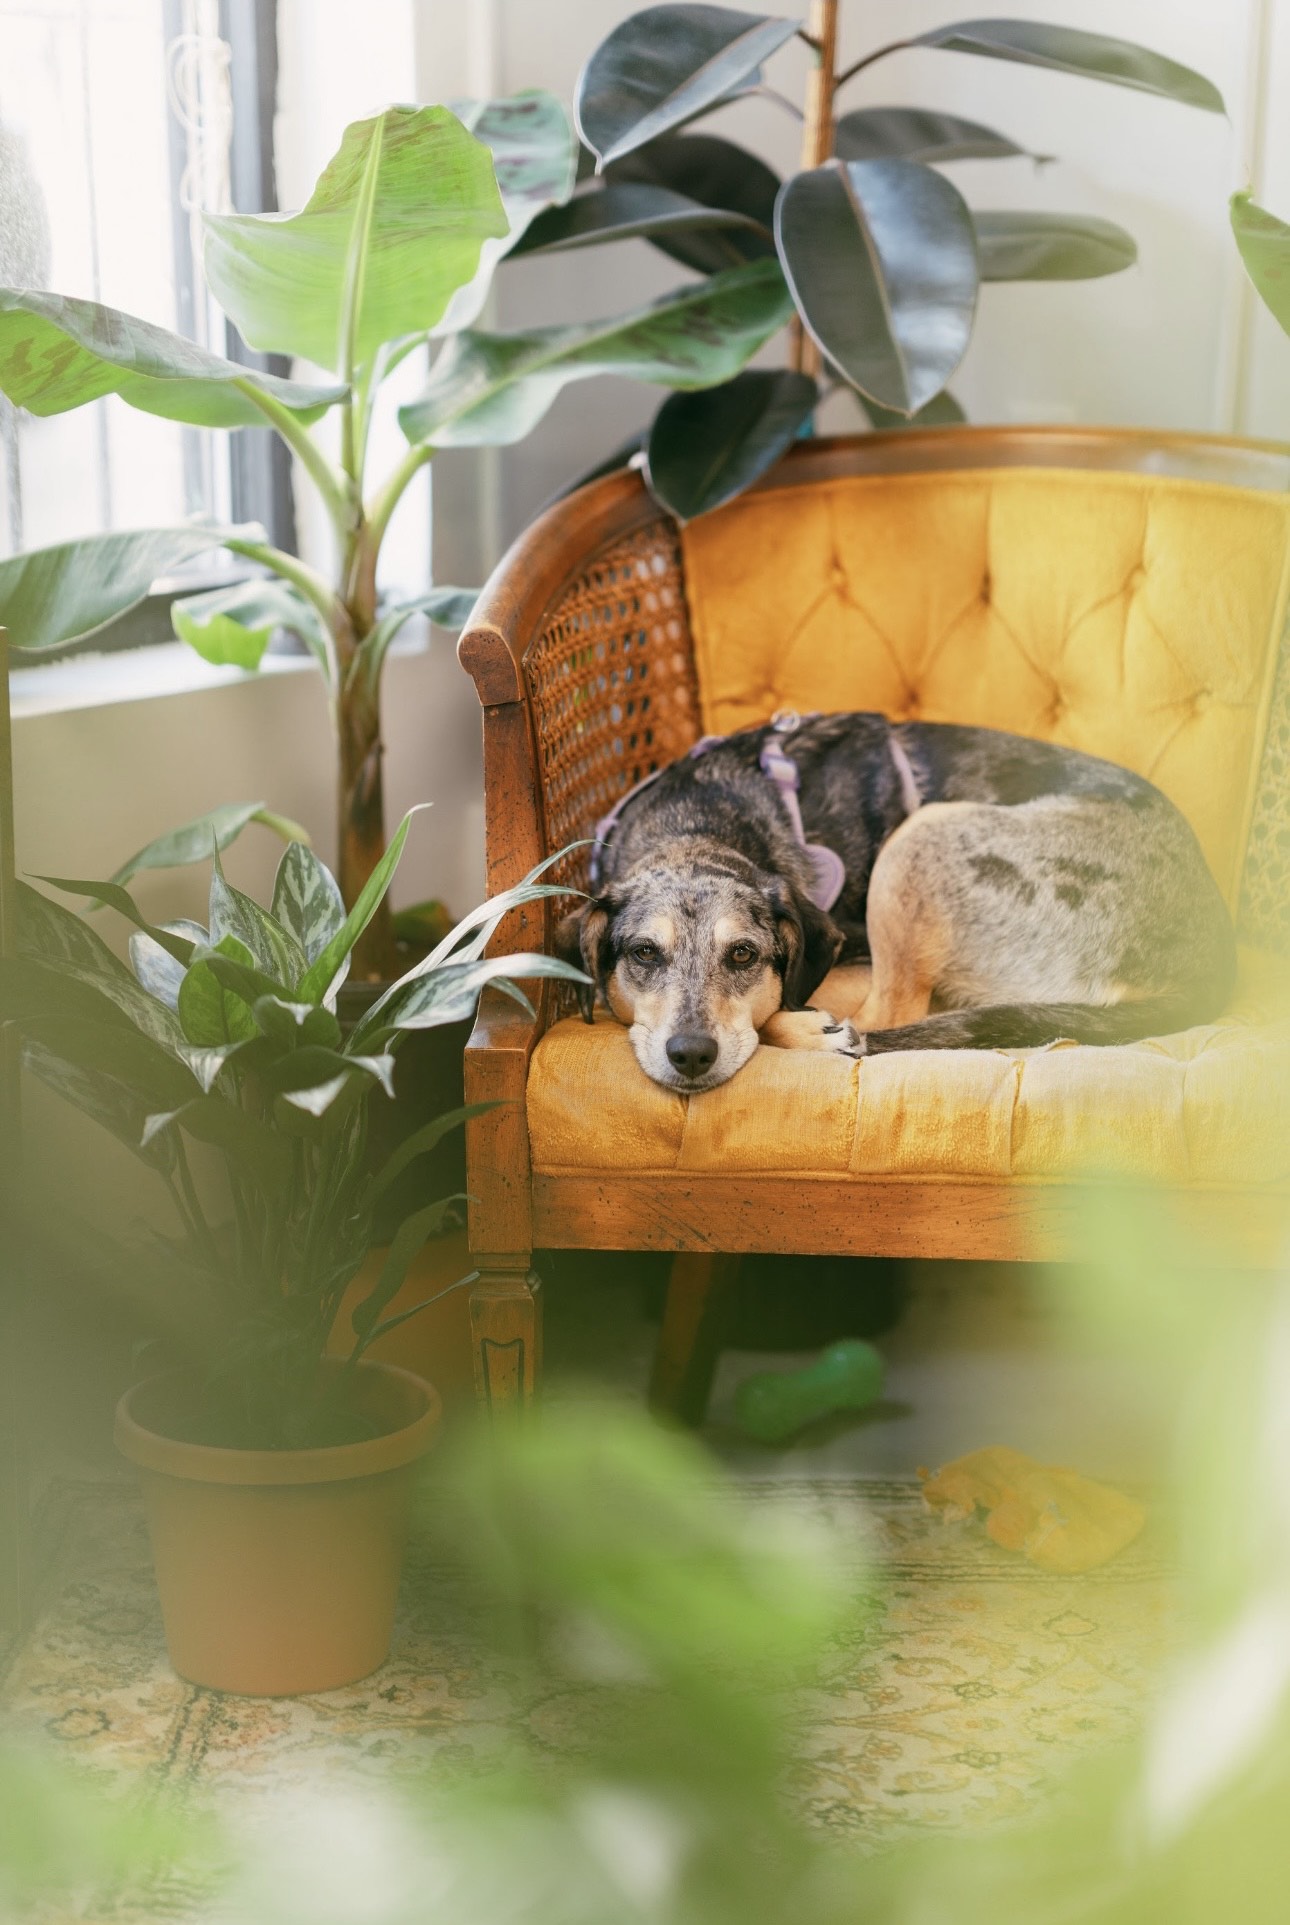 Dog laying on an orange chair in Urban Houseplant Collective.